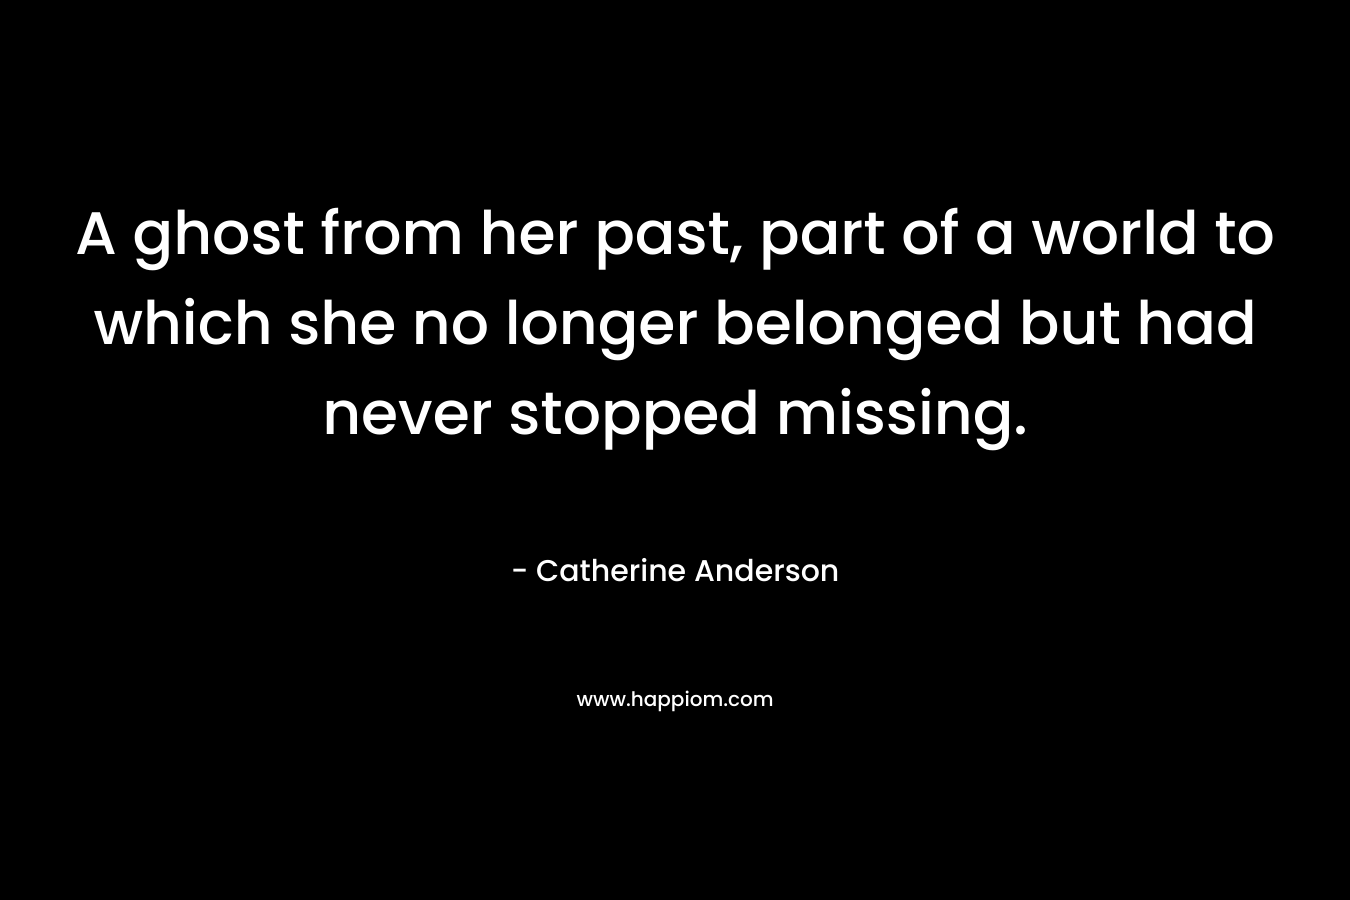 A ghost from her past, part of a world to which she no longer belonged but had never stopped missing. – Catherine Anderson